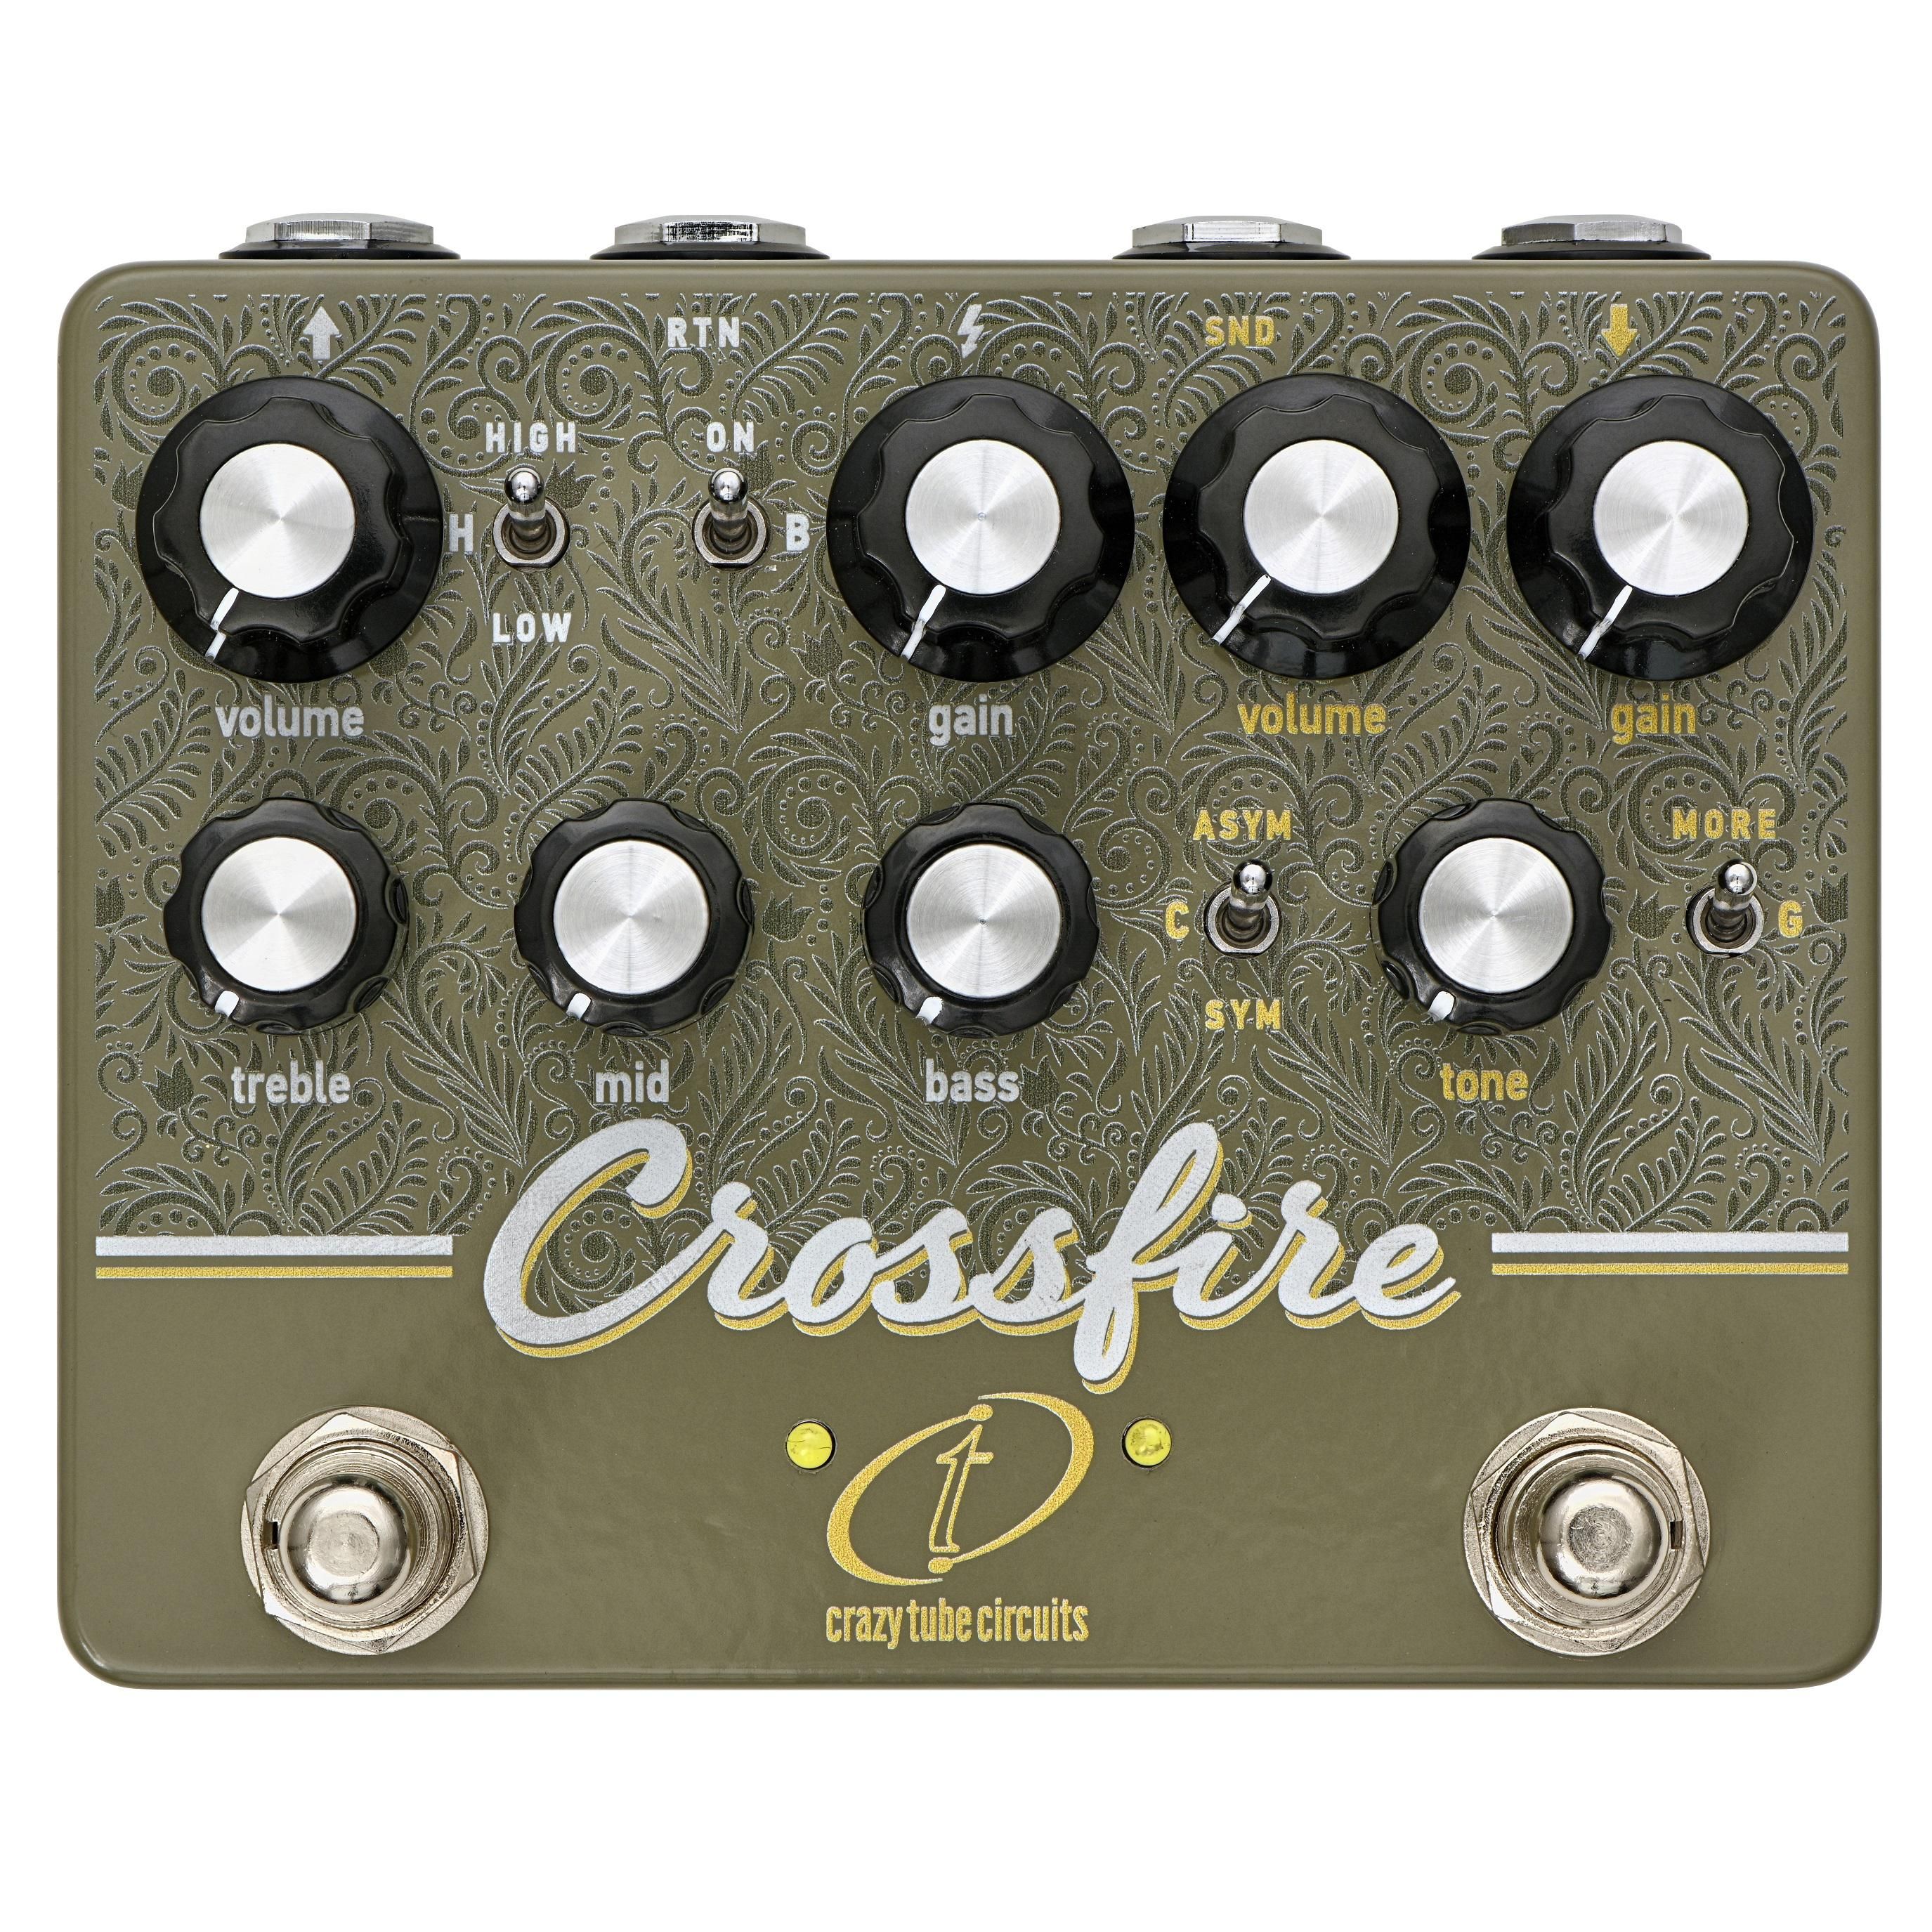 Crazy Tube Circuits Releases the Crossfire